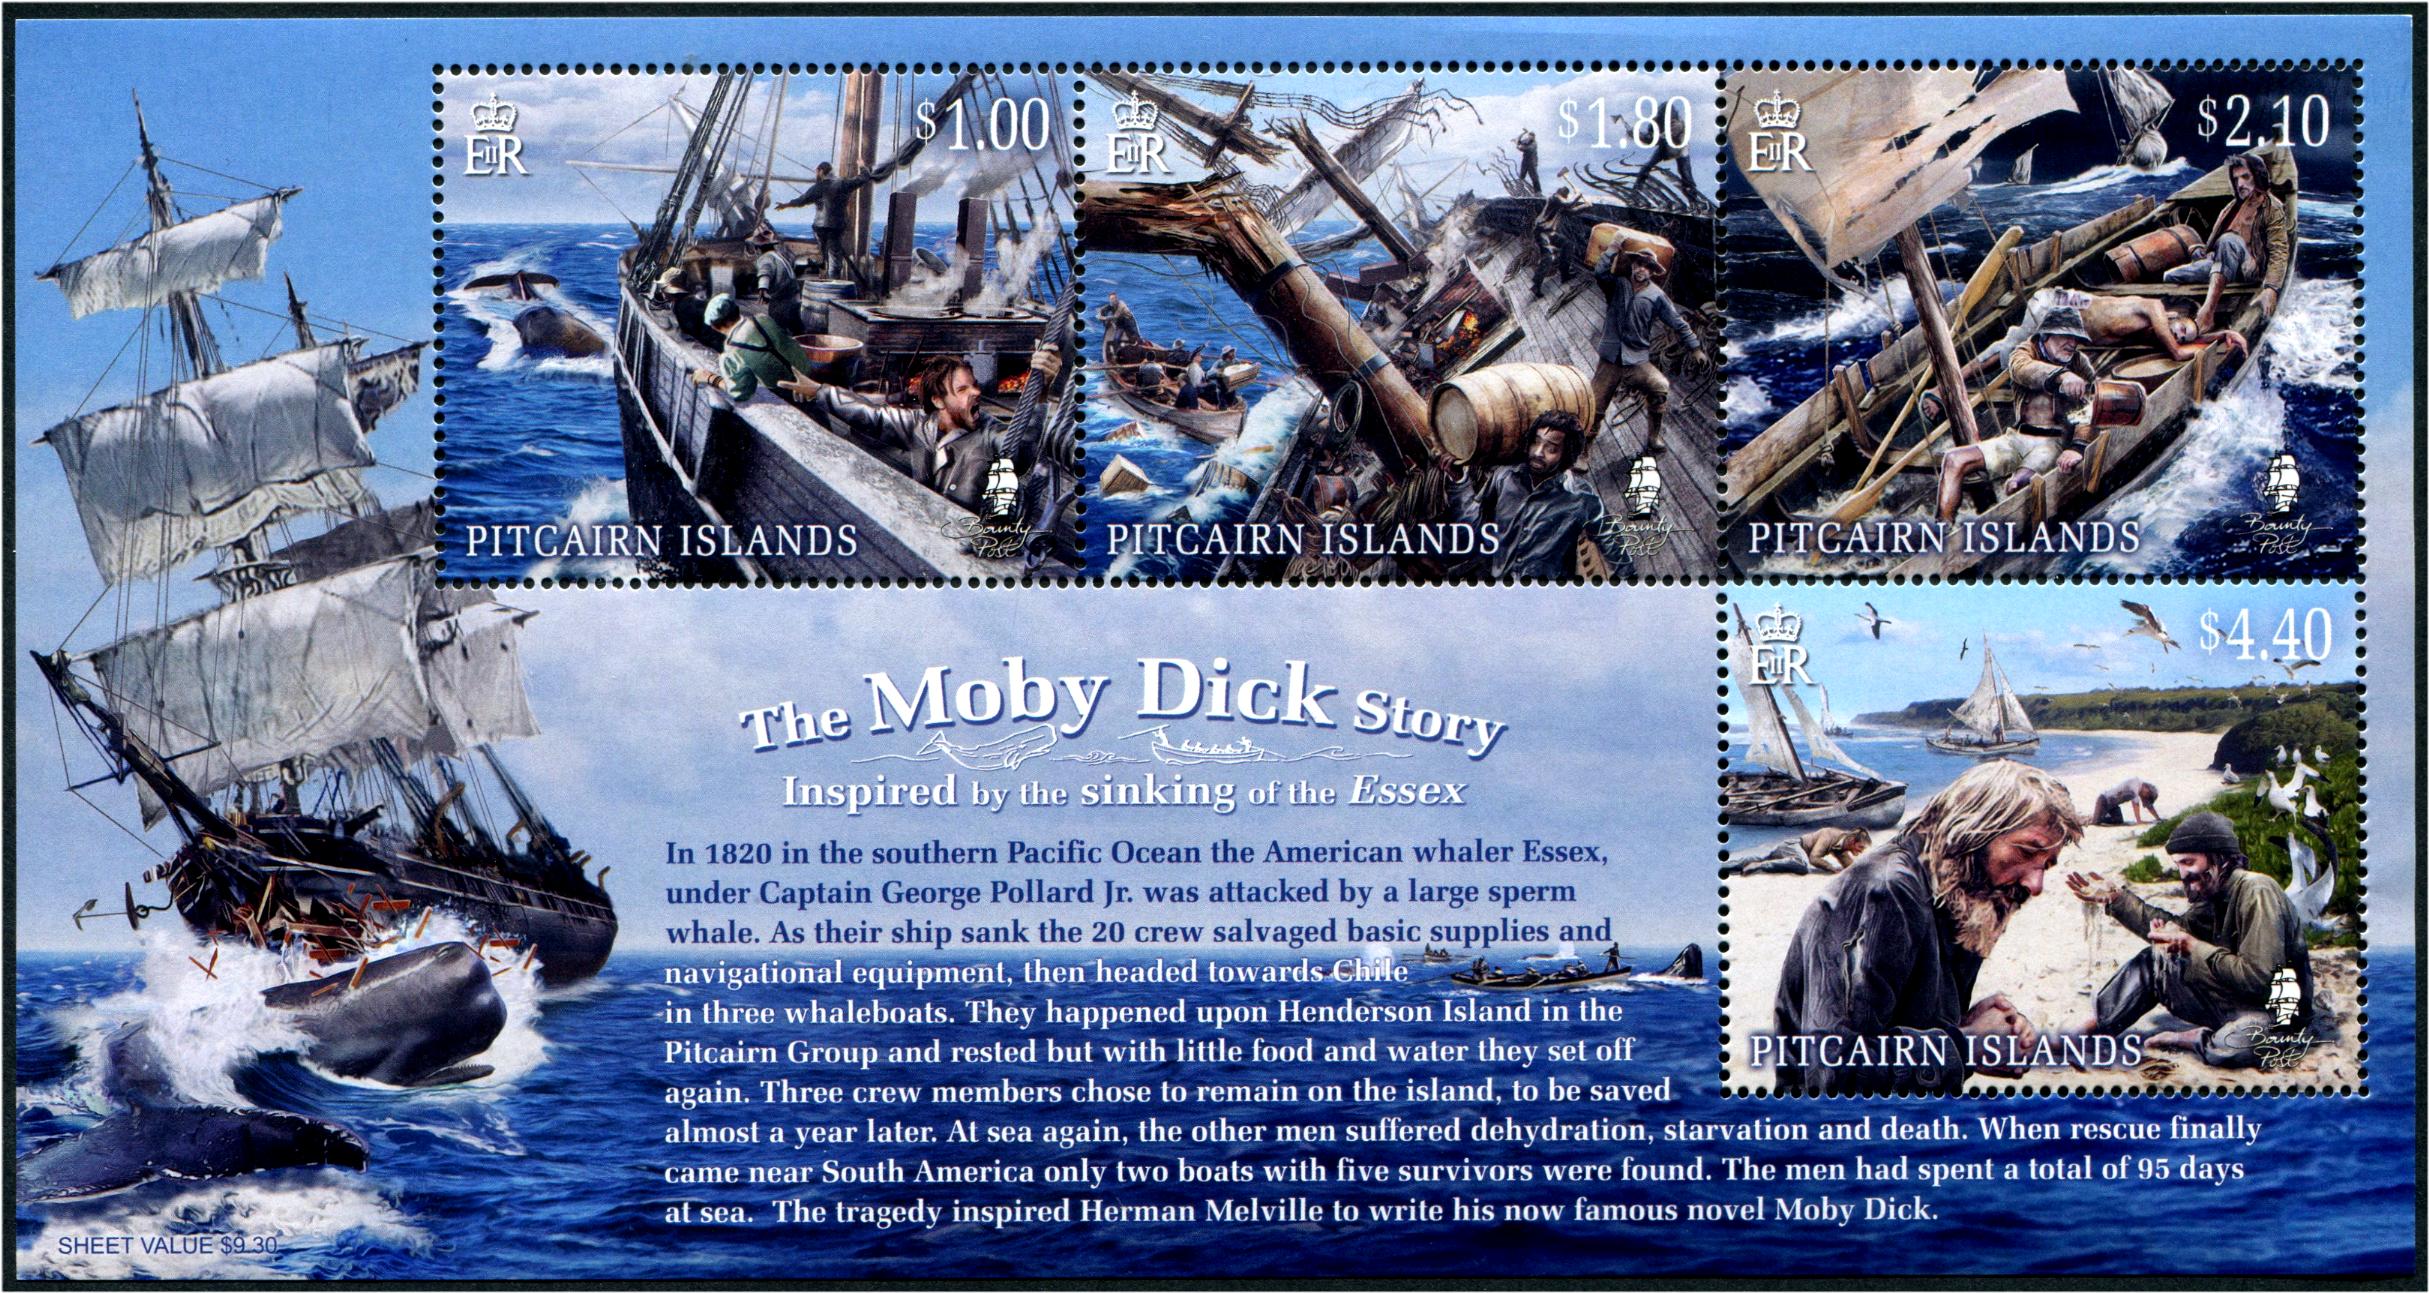 The ship in moby dick